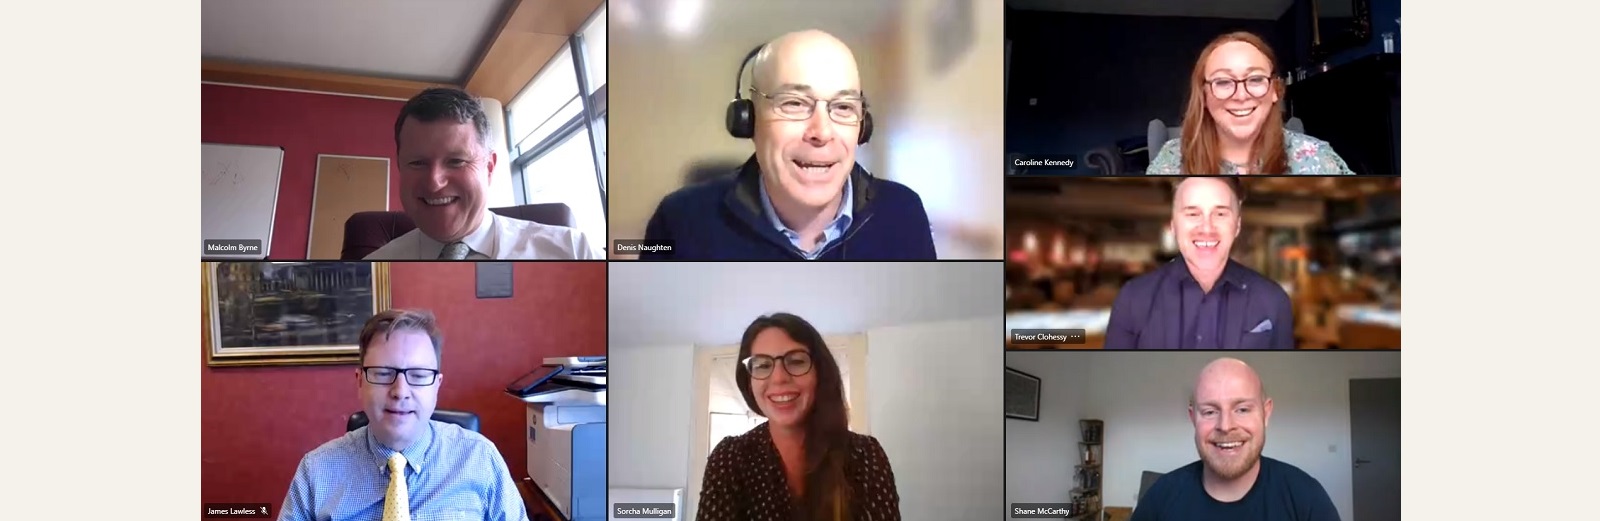 Participants in the virtual meeting of the Oireachtas Friends of Science and Technology